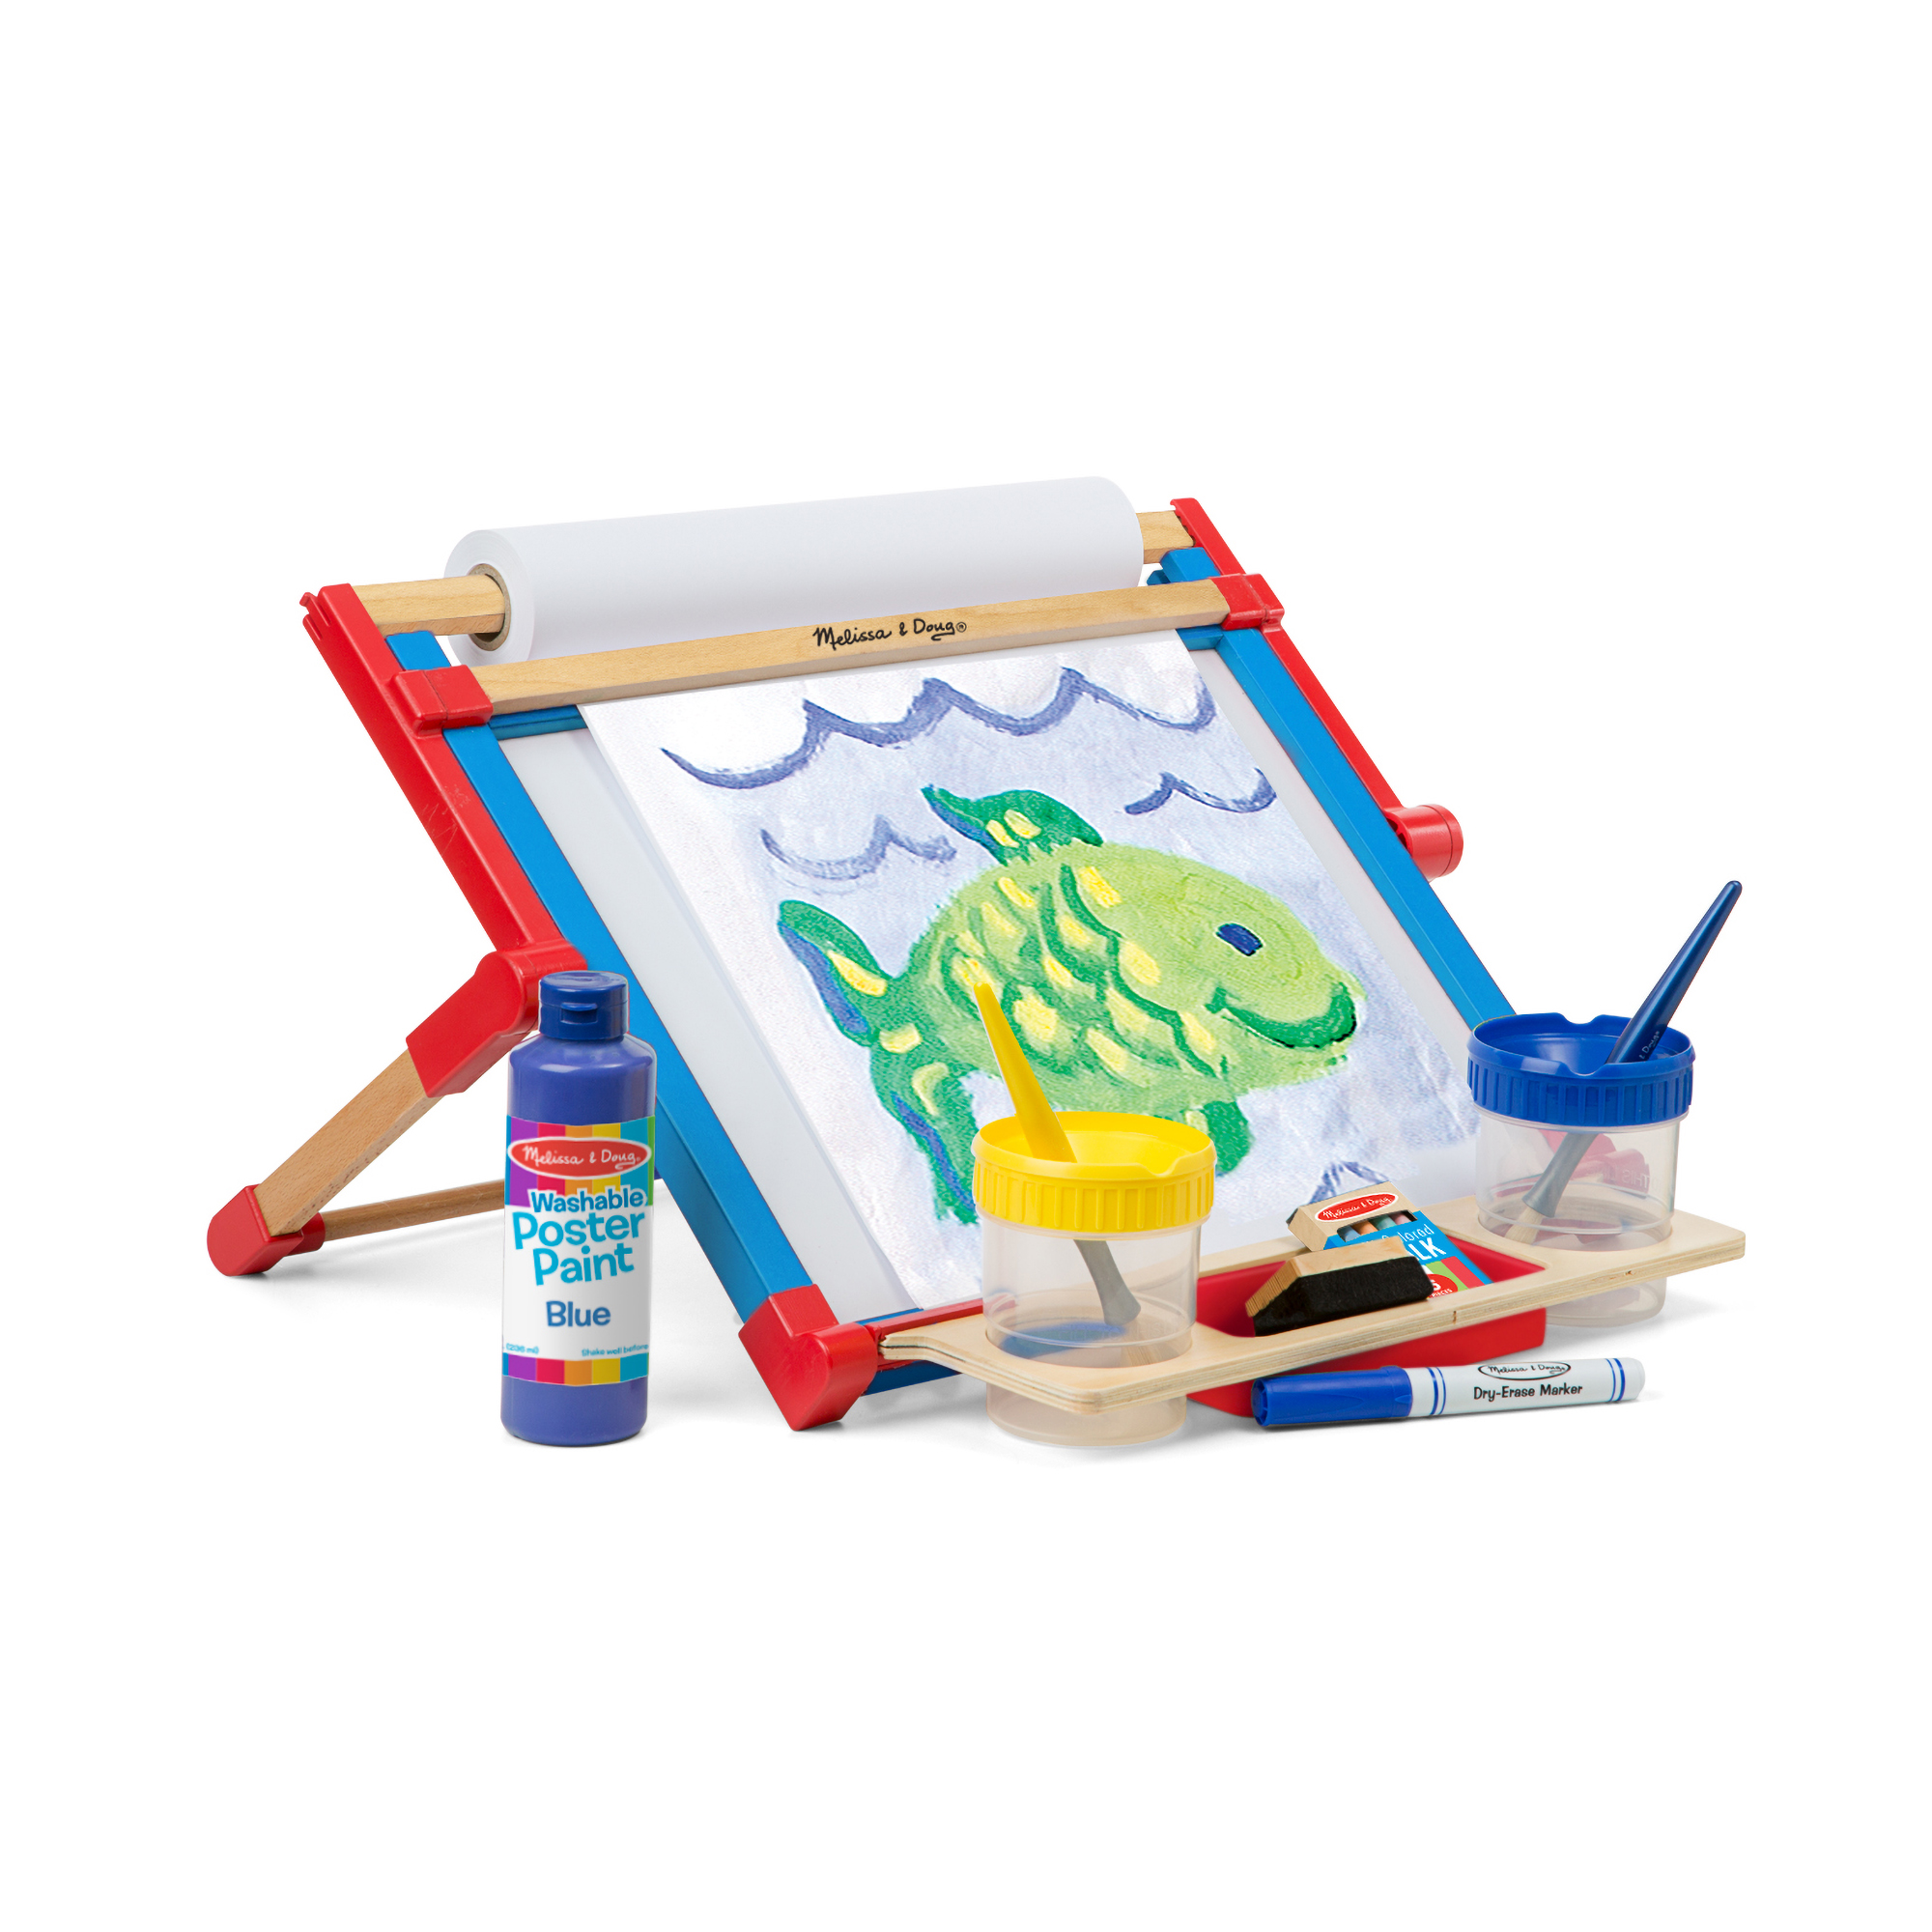 Melissa & Doug Double-Sided Wooden Tabletop Art Easel and Art Supplies - image 4 of 9